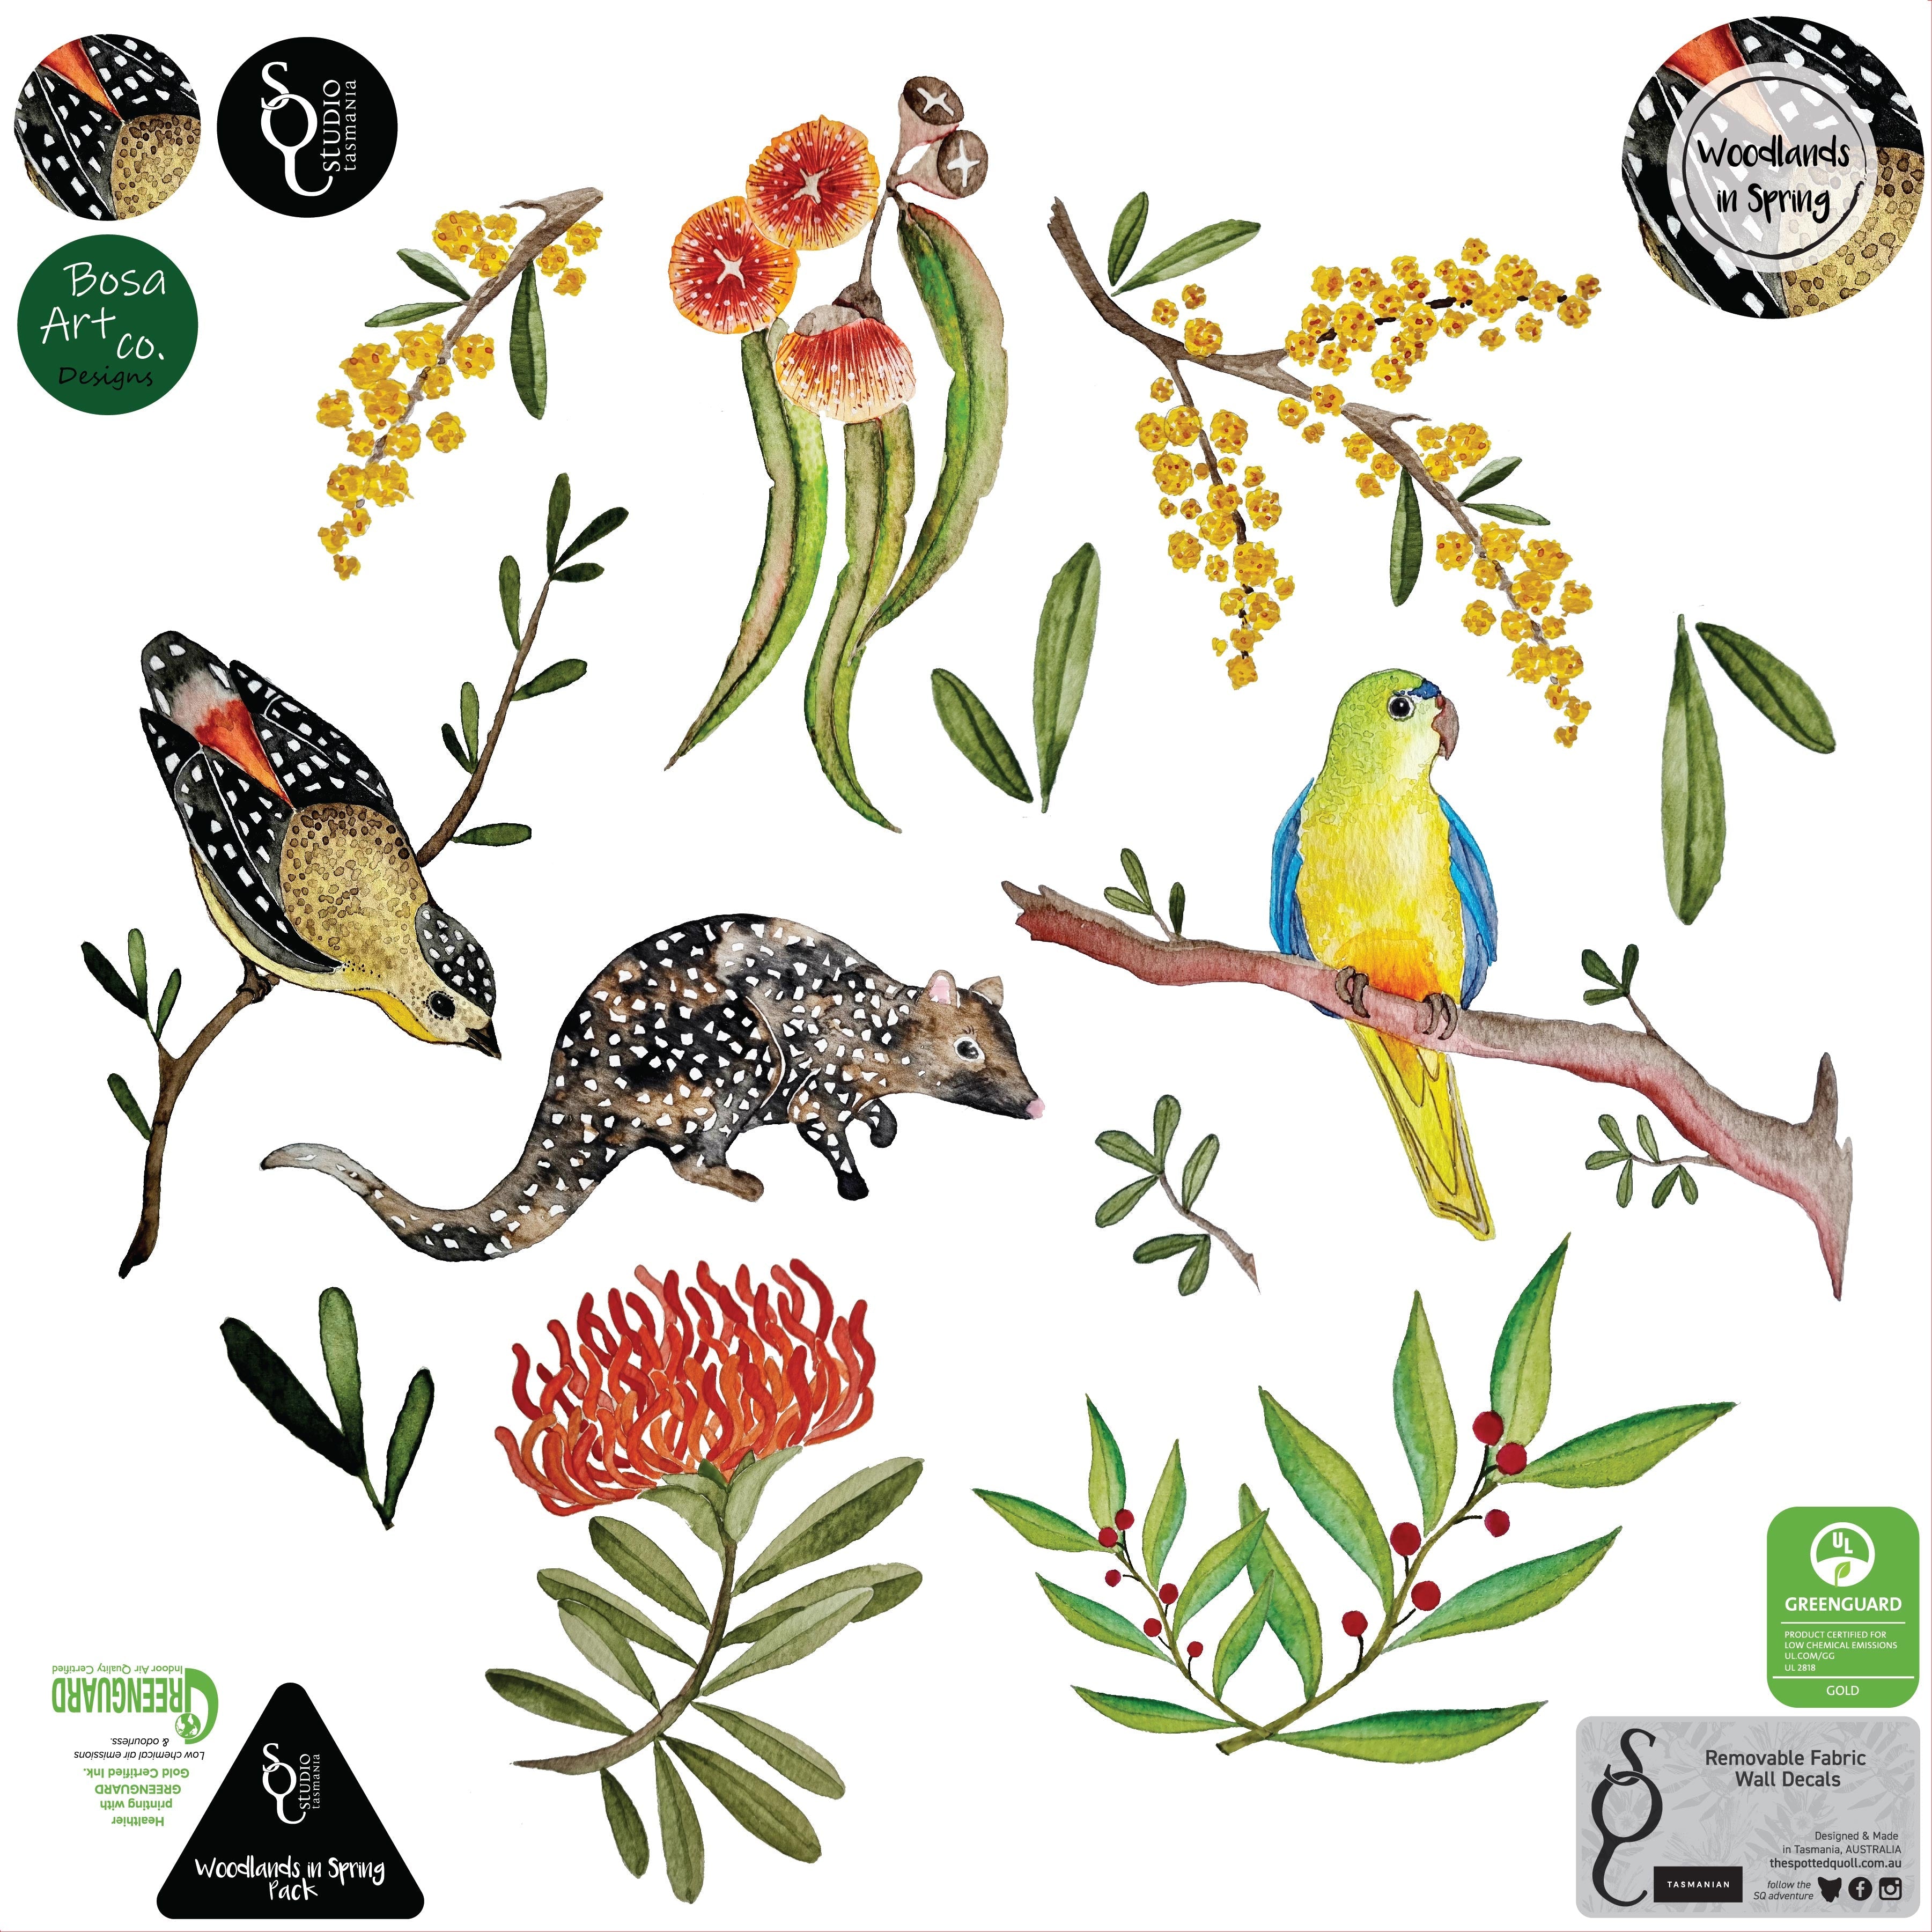 Children’s Tasmanian "Woodlands in Spring" Decals decal The Spotted Quoll 60cm Pack 